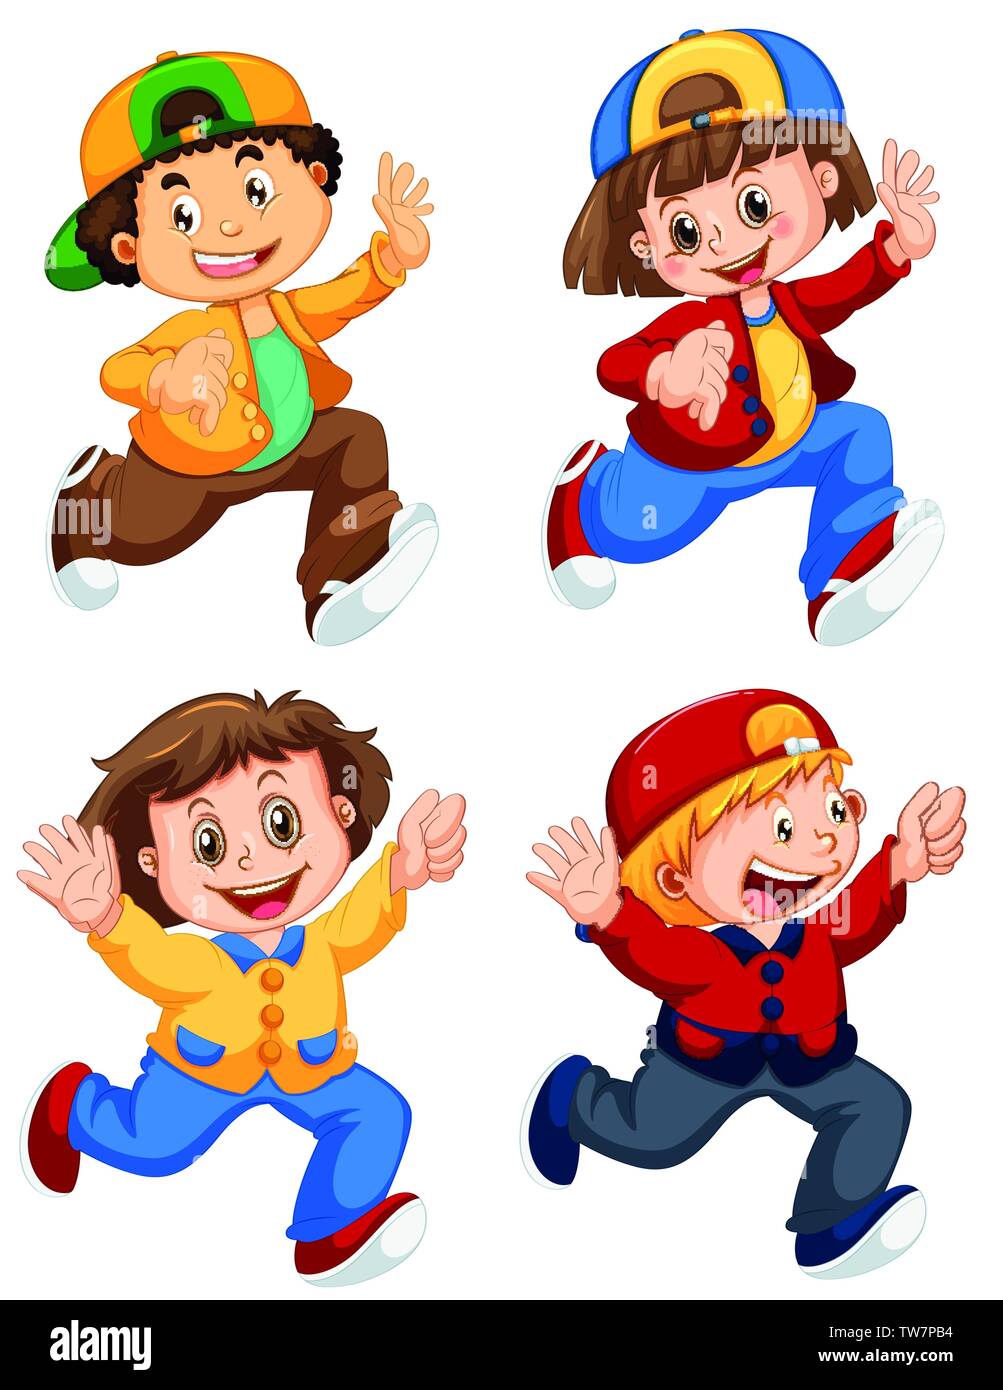 Set of people character illustration Stock Vector